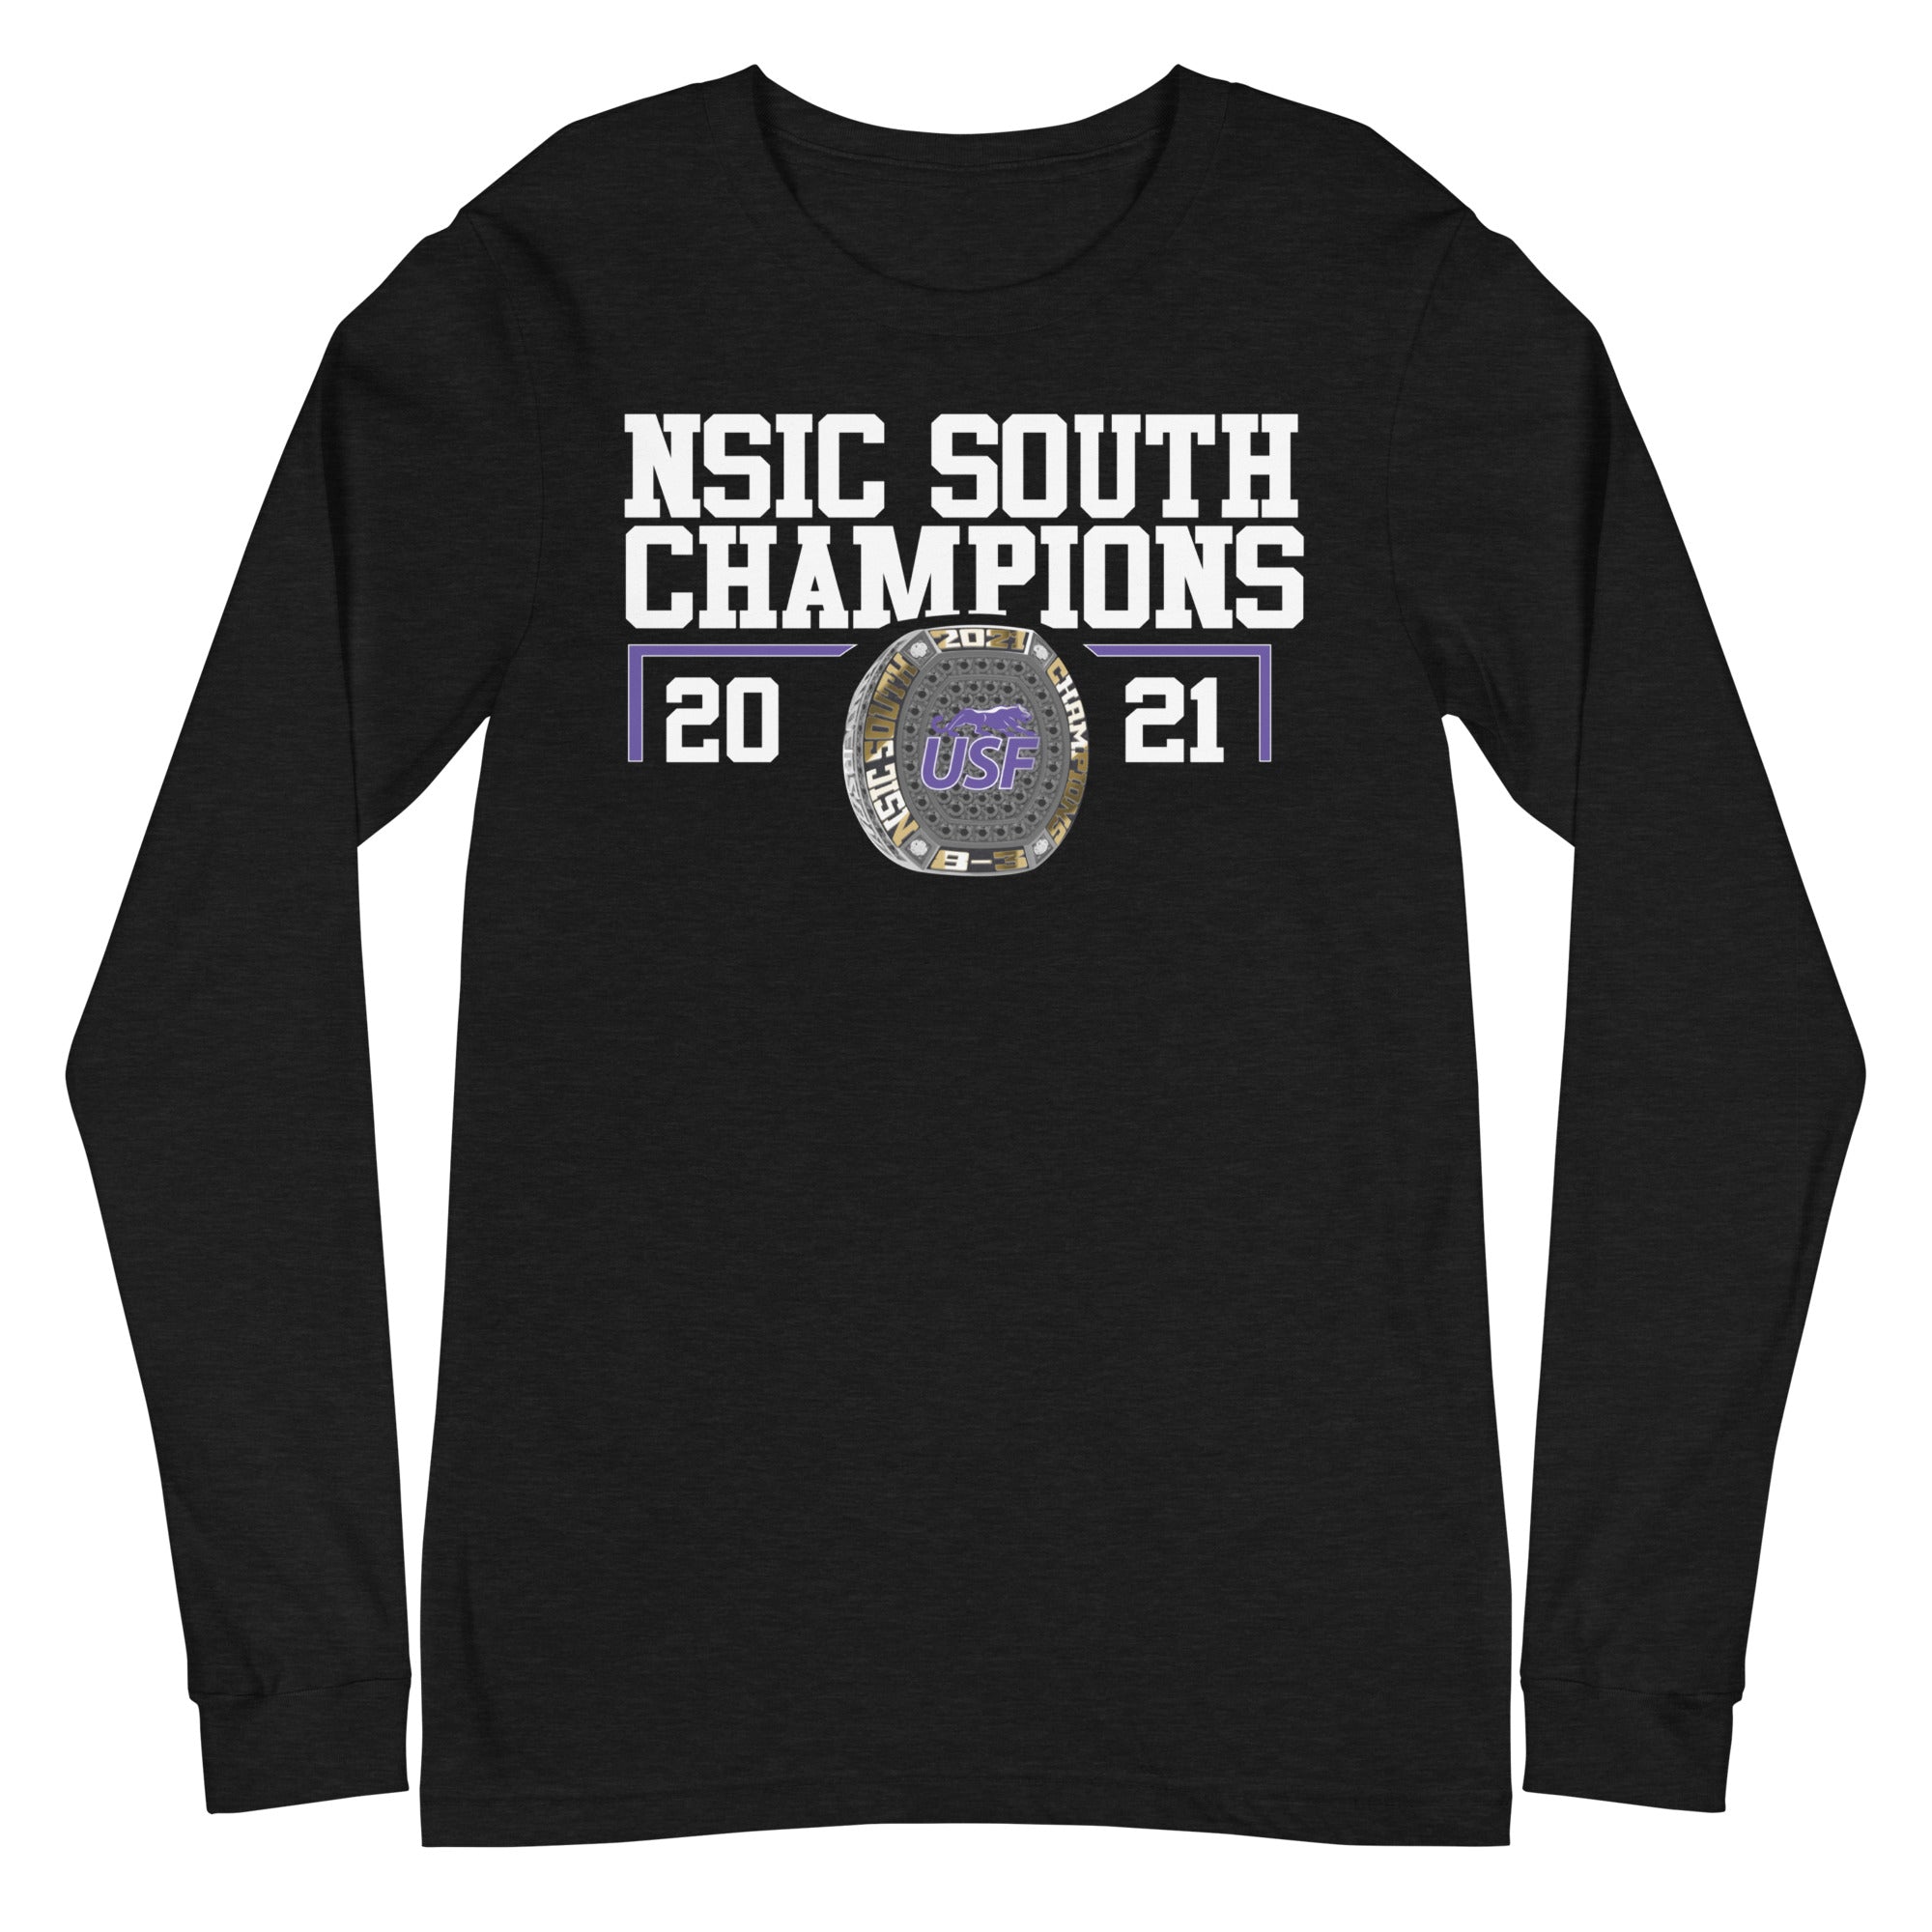 University of Sioux Falls NSIC South Champions Unisex Long Sleeve Tee